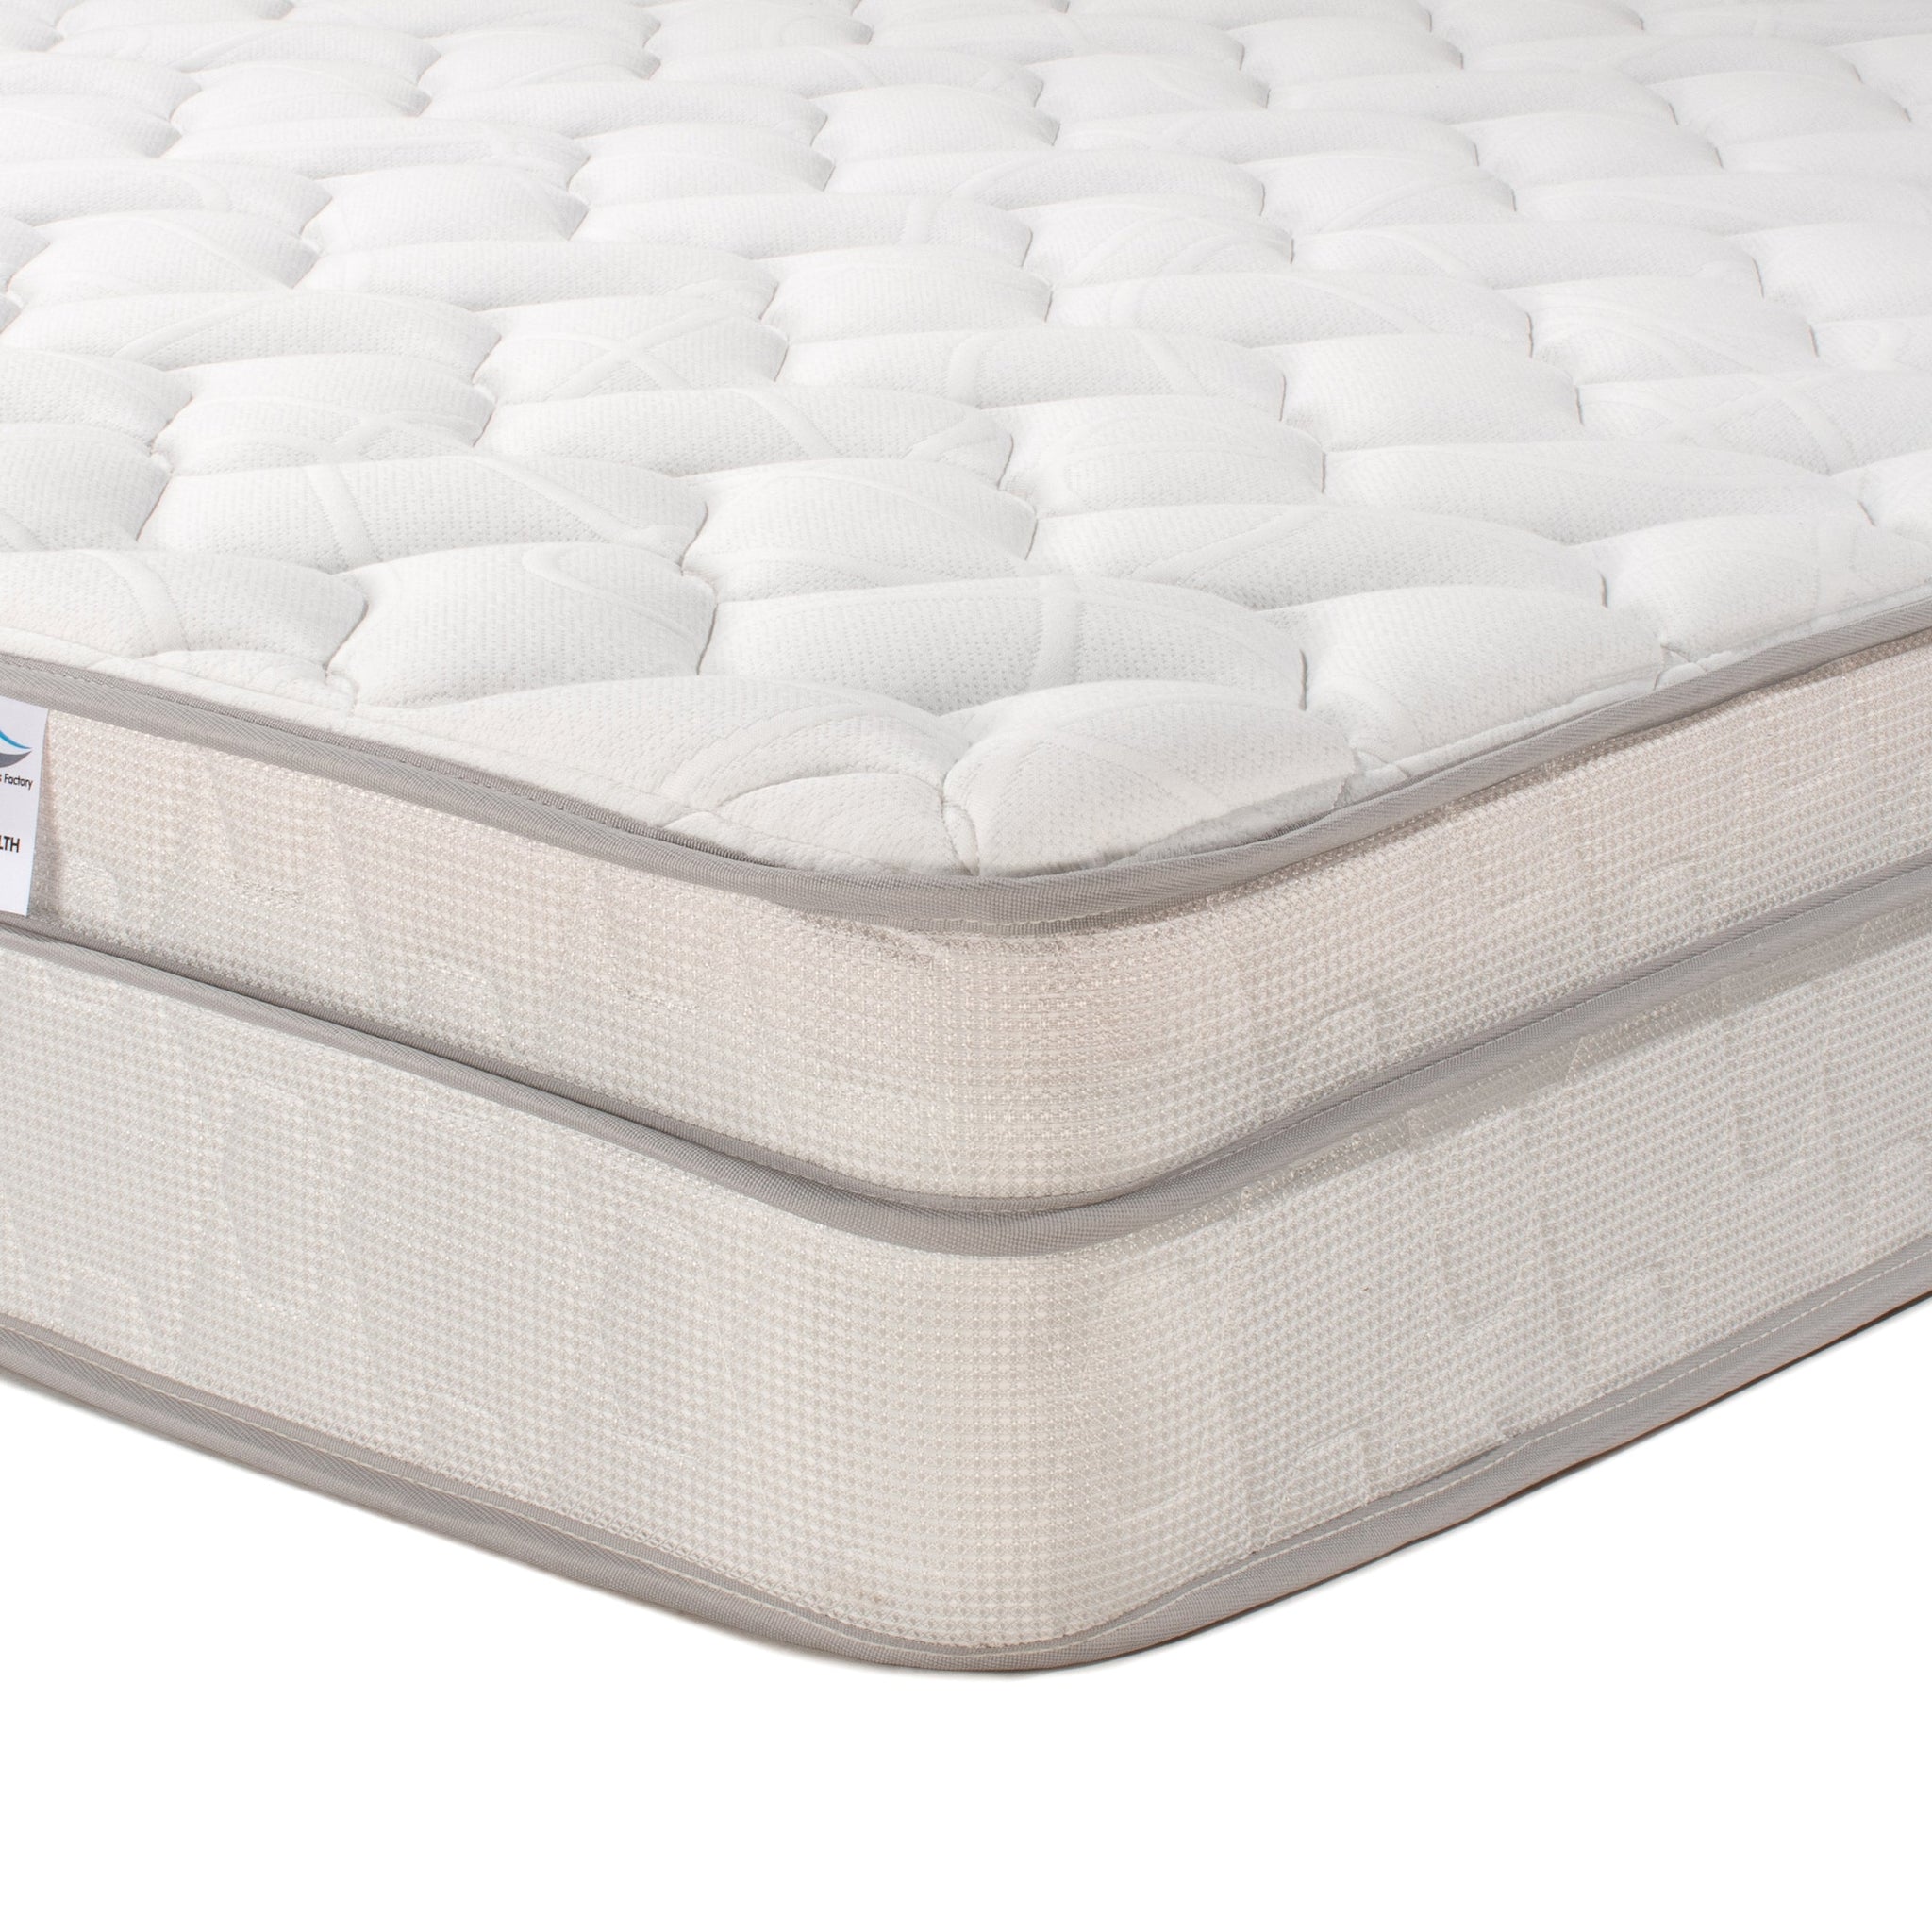 Chiro Health Double Size Innerspring Mattress - Australian Made - 5 Year Warranty - Free Delivery - Melbourne Mattress Factory